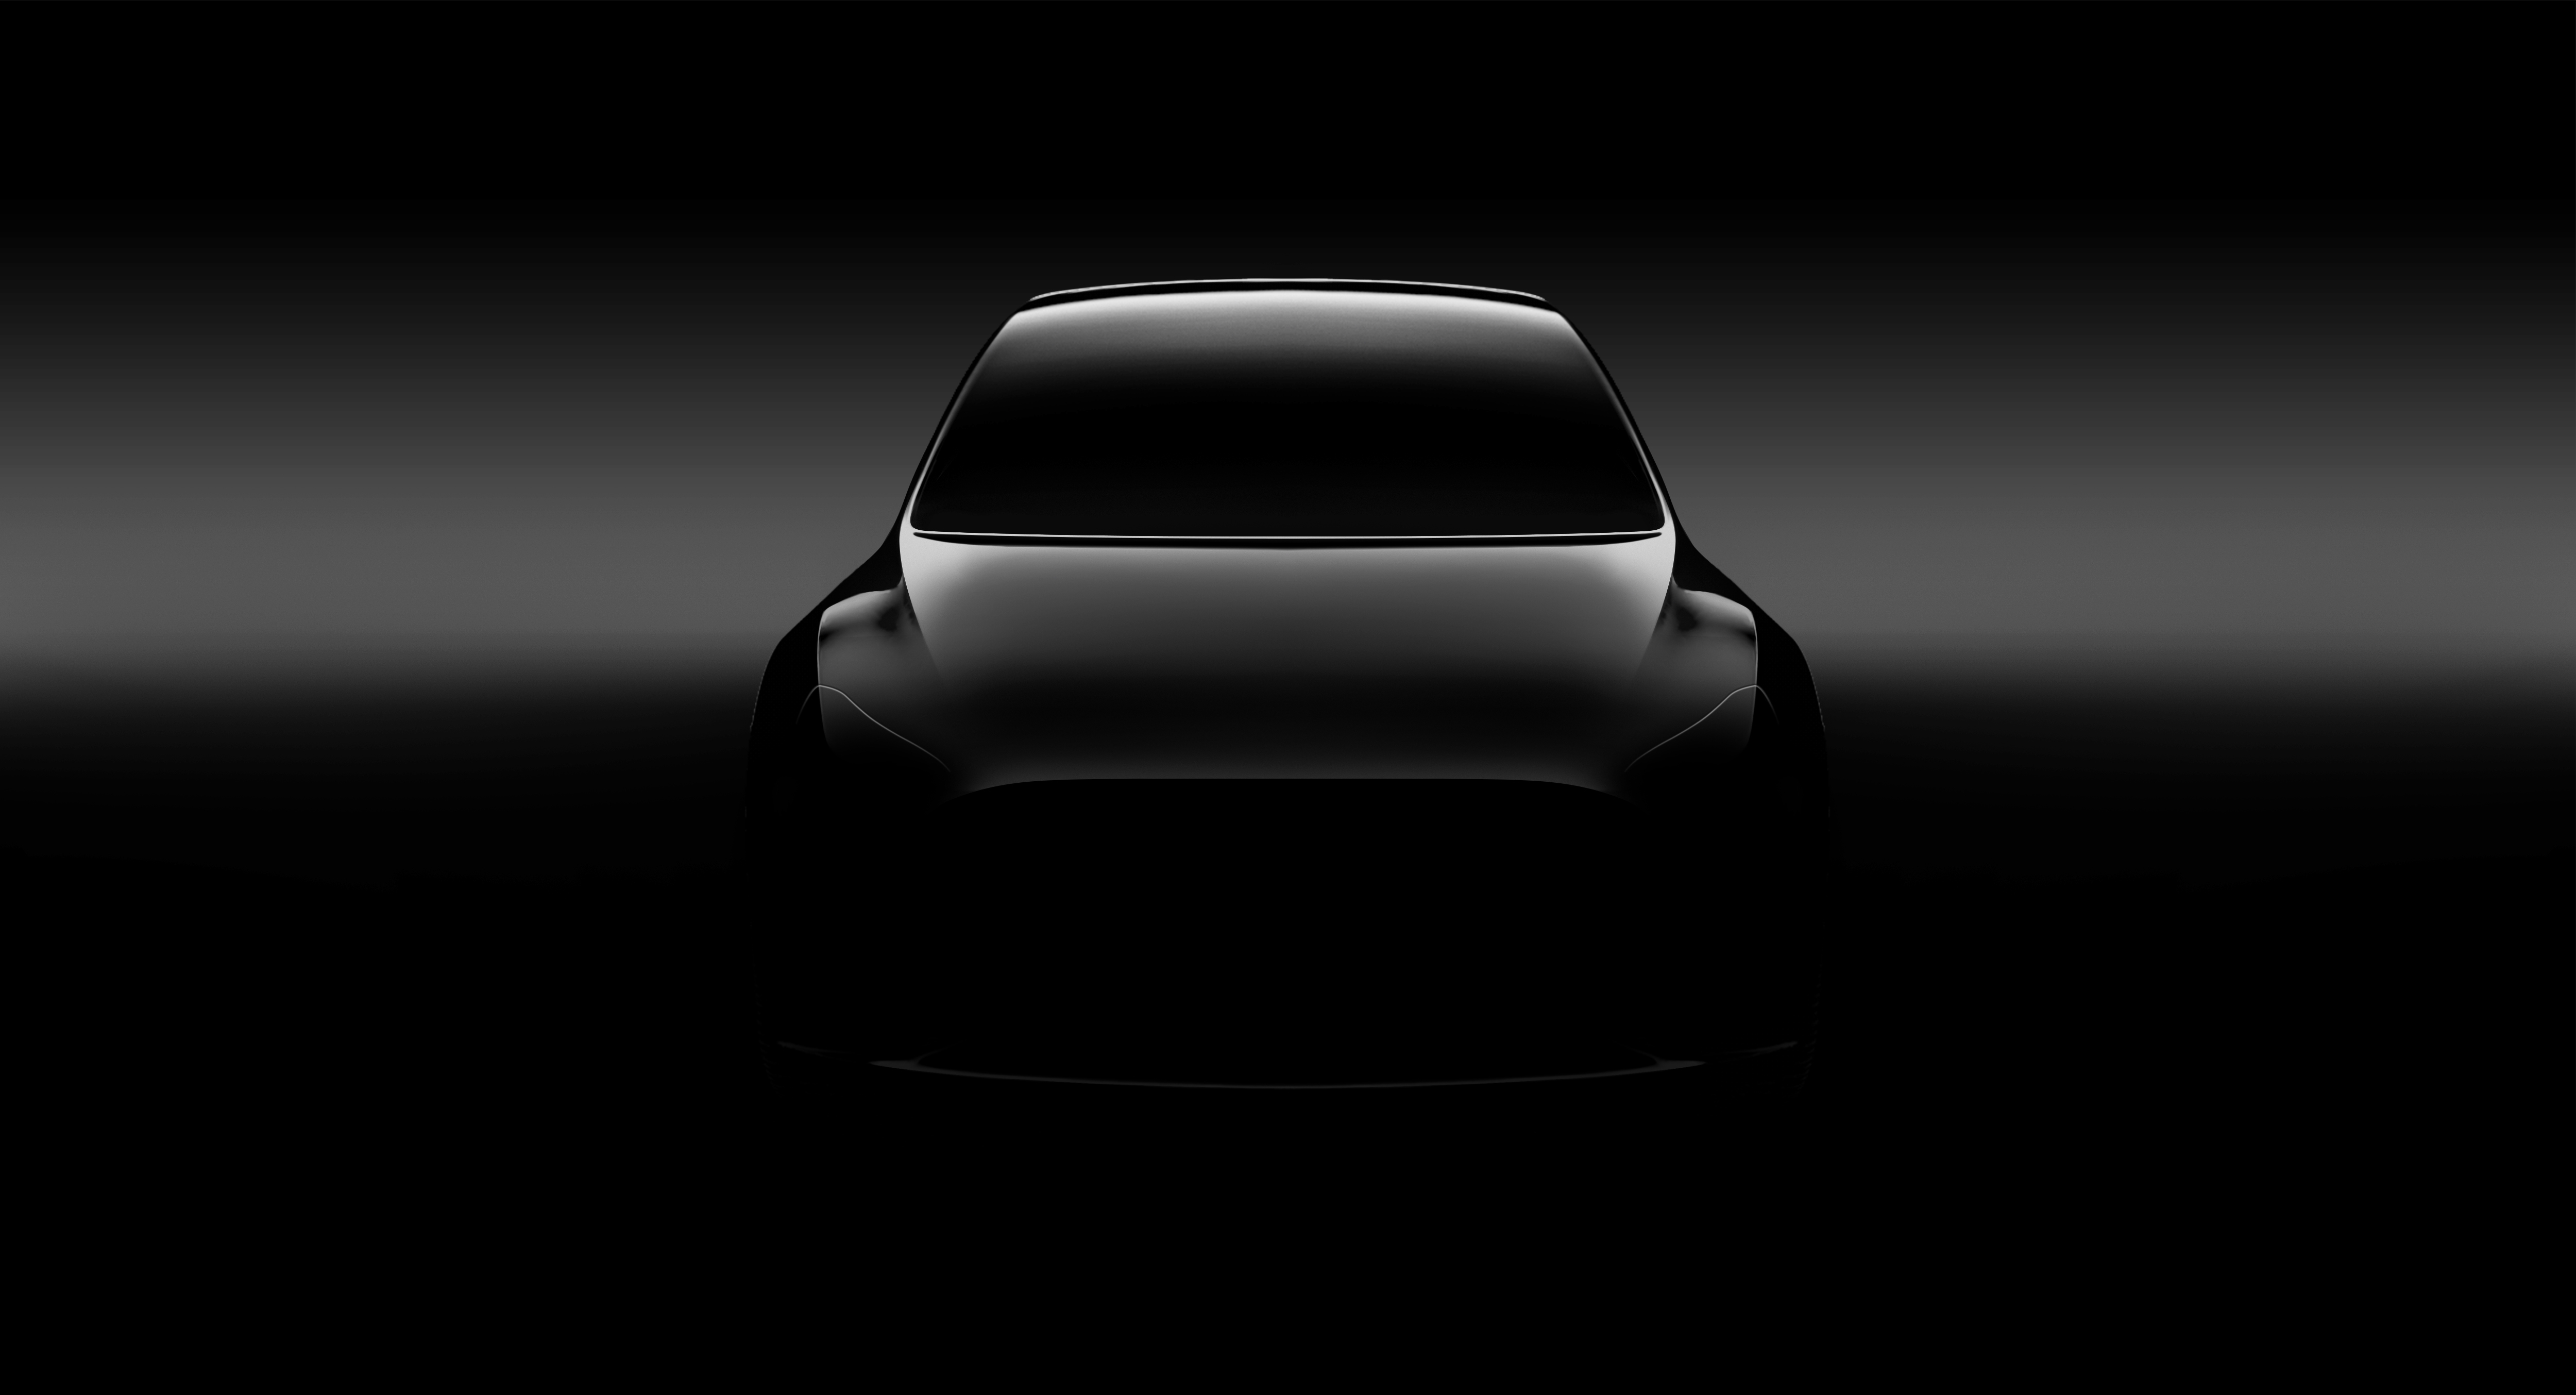 Elon Musk Shares A New Image Of The Tesla Model Y Fortune